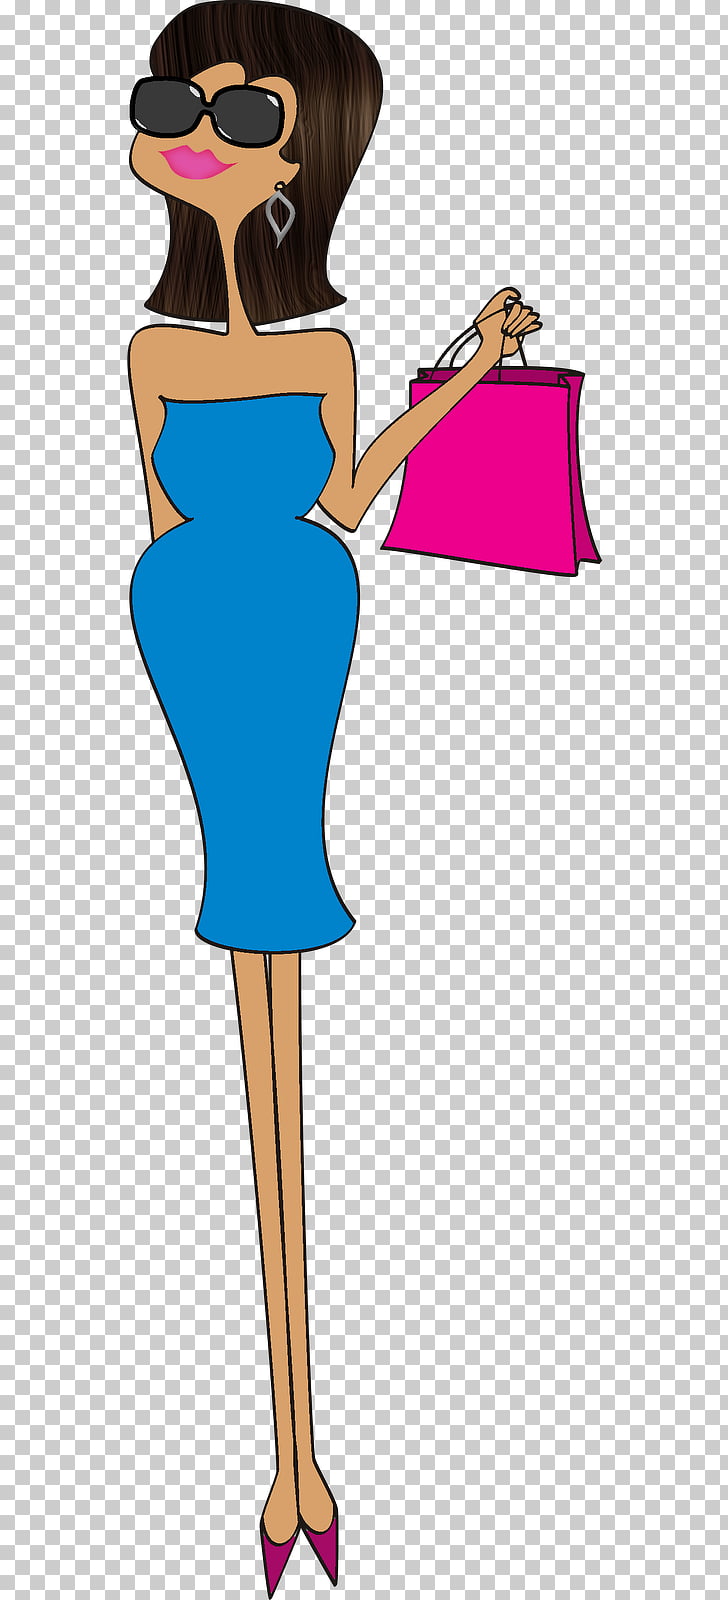 Woman , shopping spree PNG clipart.